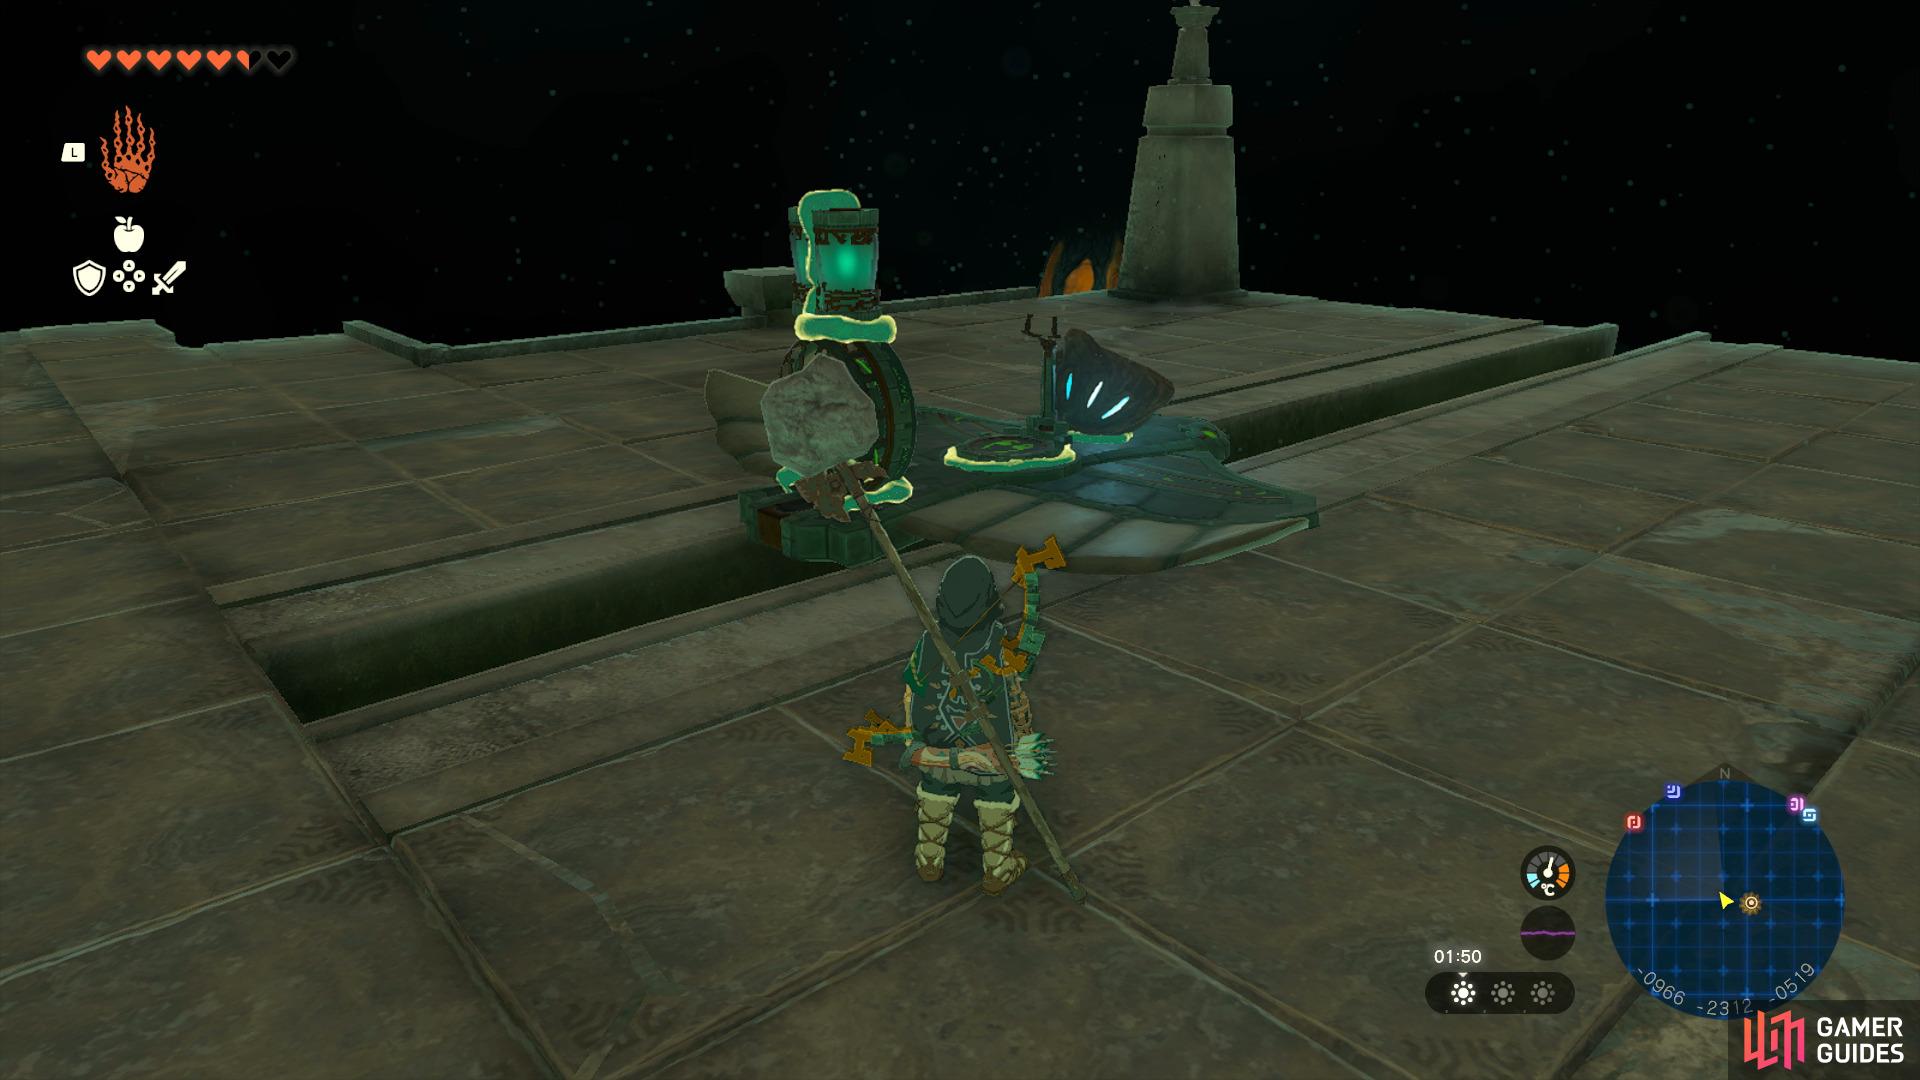 then use the wing glider to reach the statue.